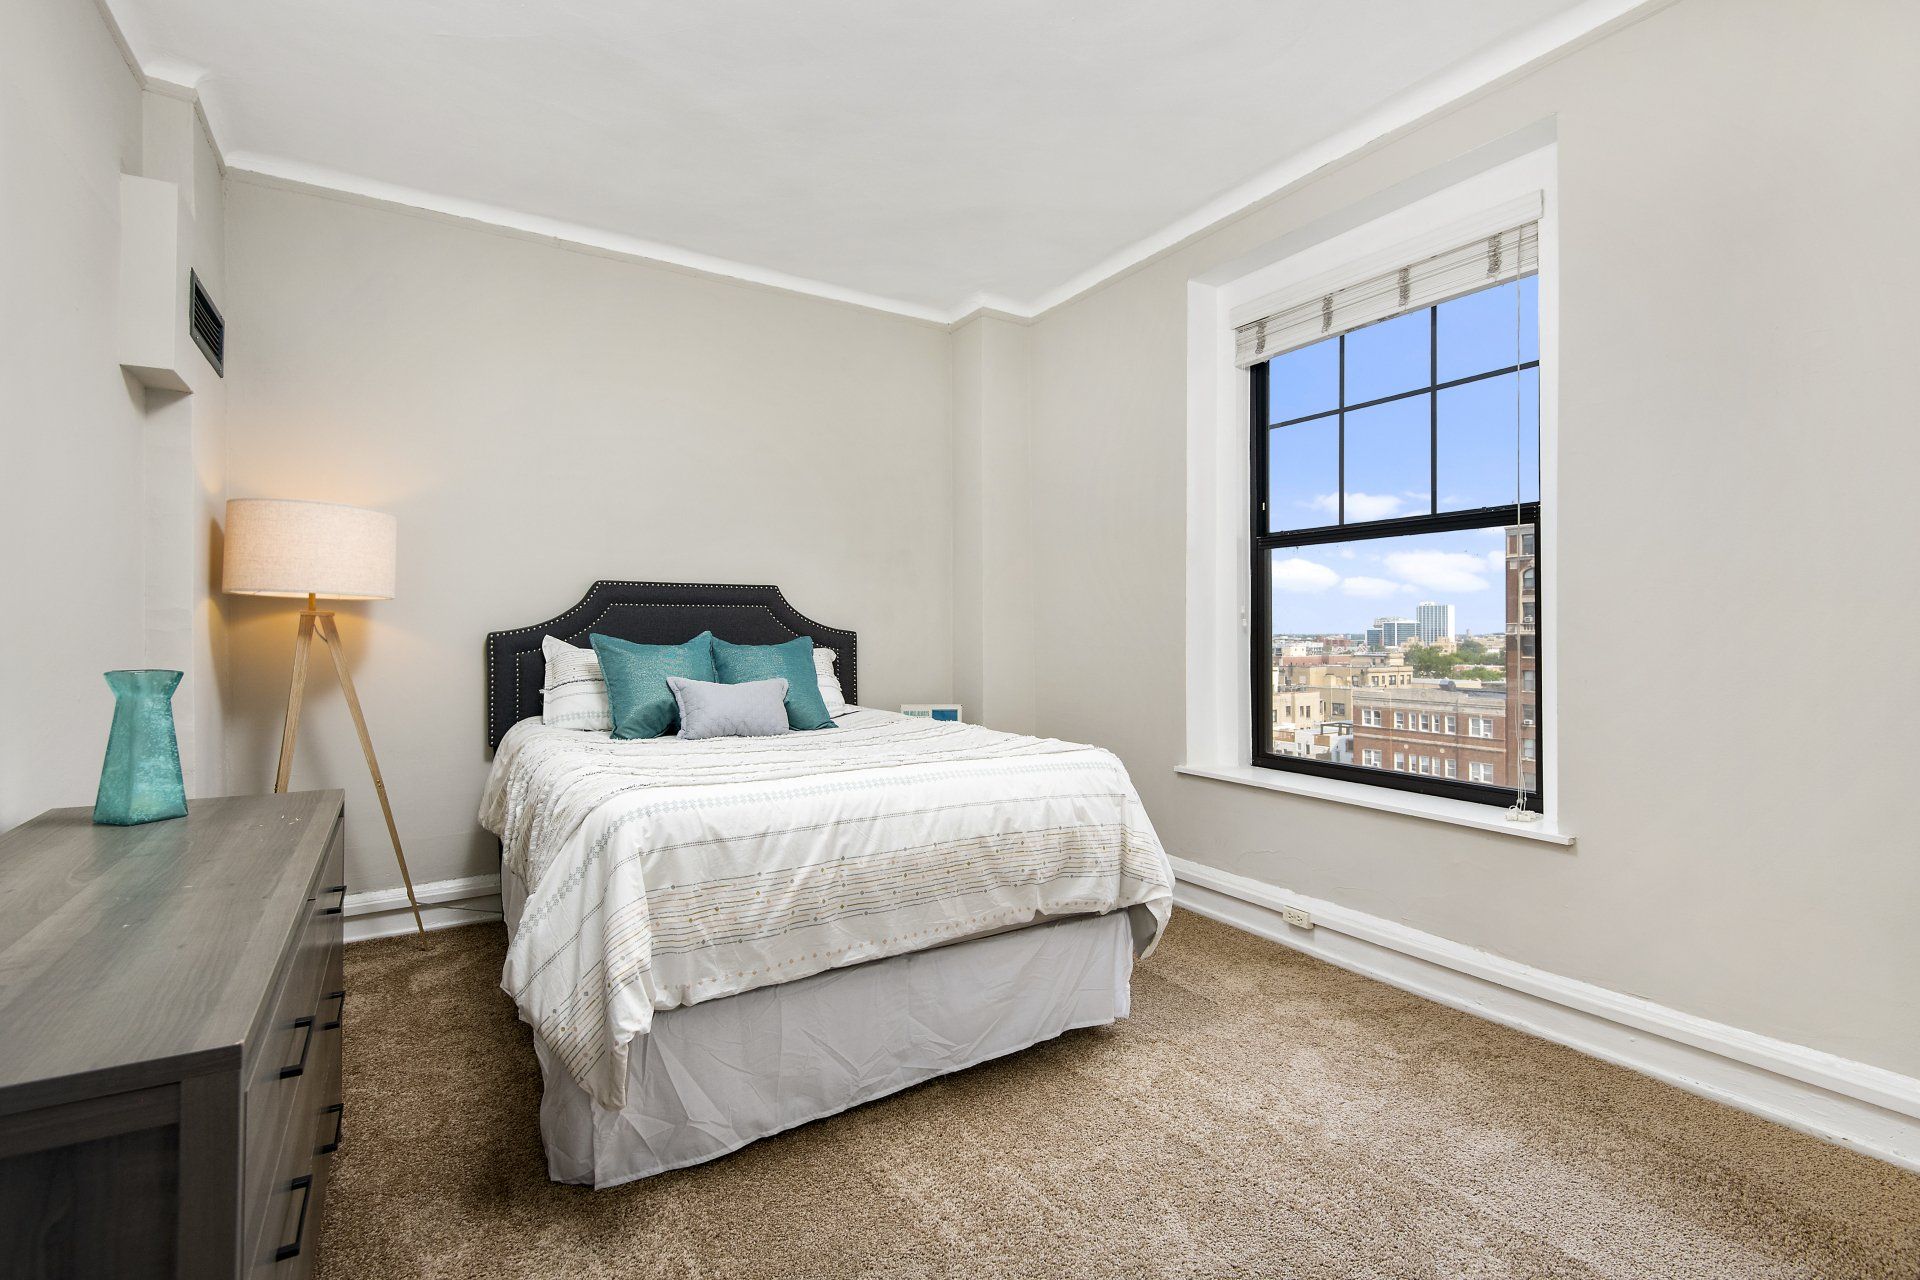 A bedroom with a bed, dresser, lamp, and window at The Belmont by Reside.